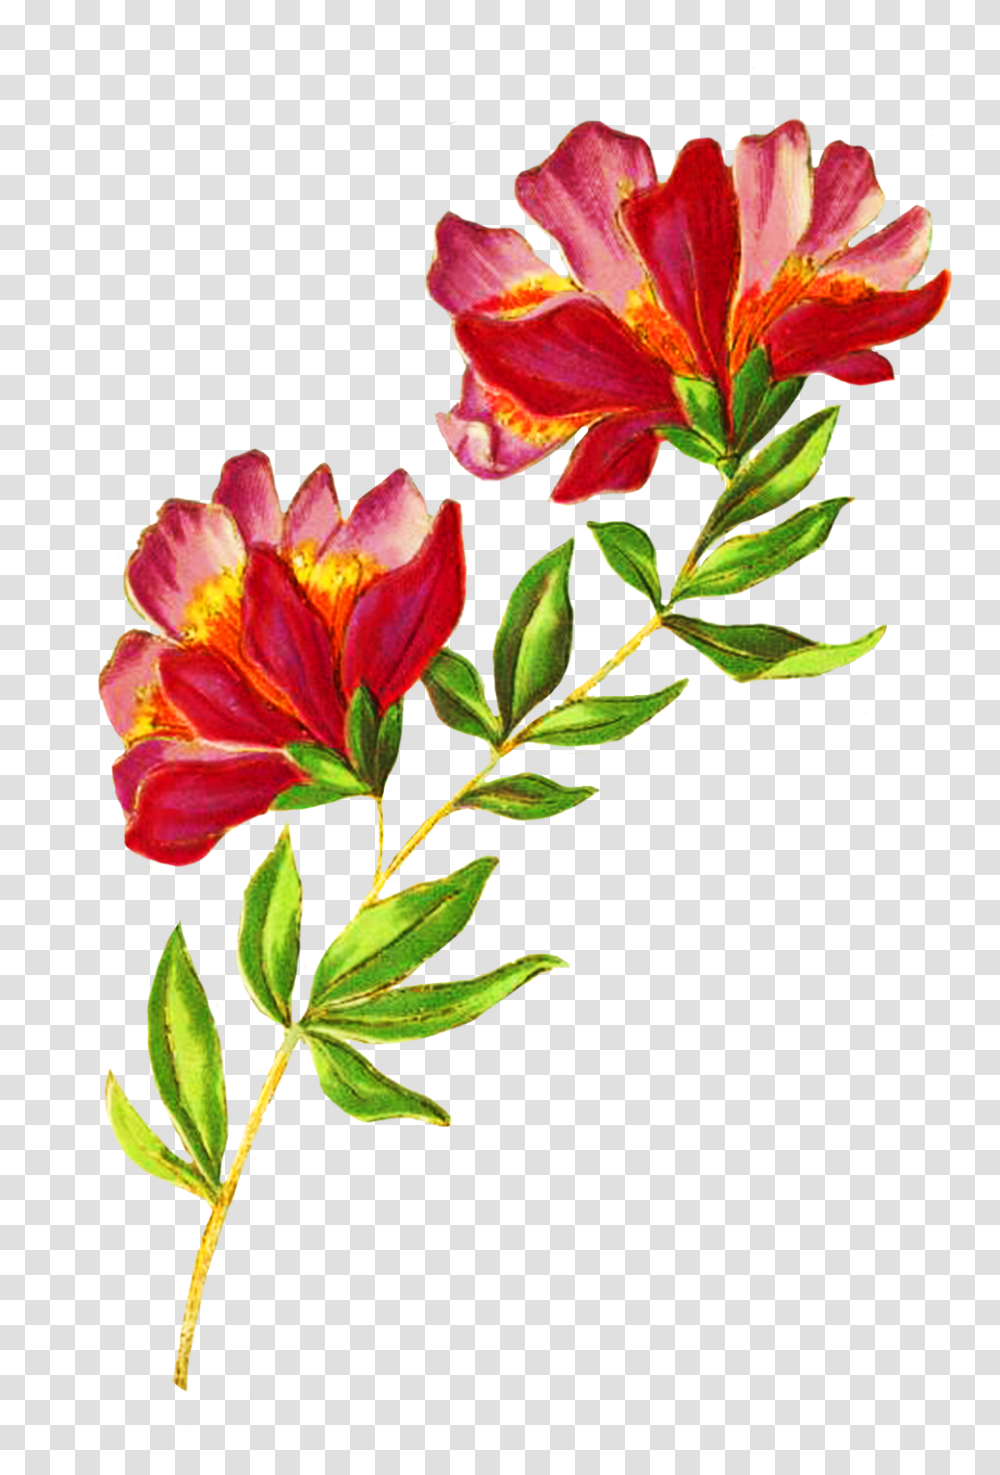 Beautiful Delicate Flower Beautiful Flower Images Hd, Plant, Blossom, Petal, Lily Transparent Png